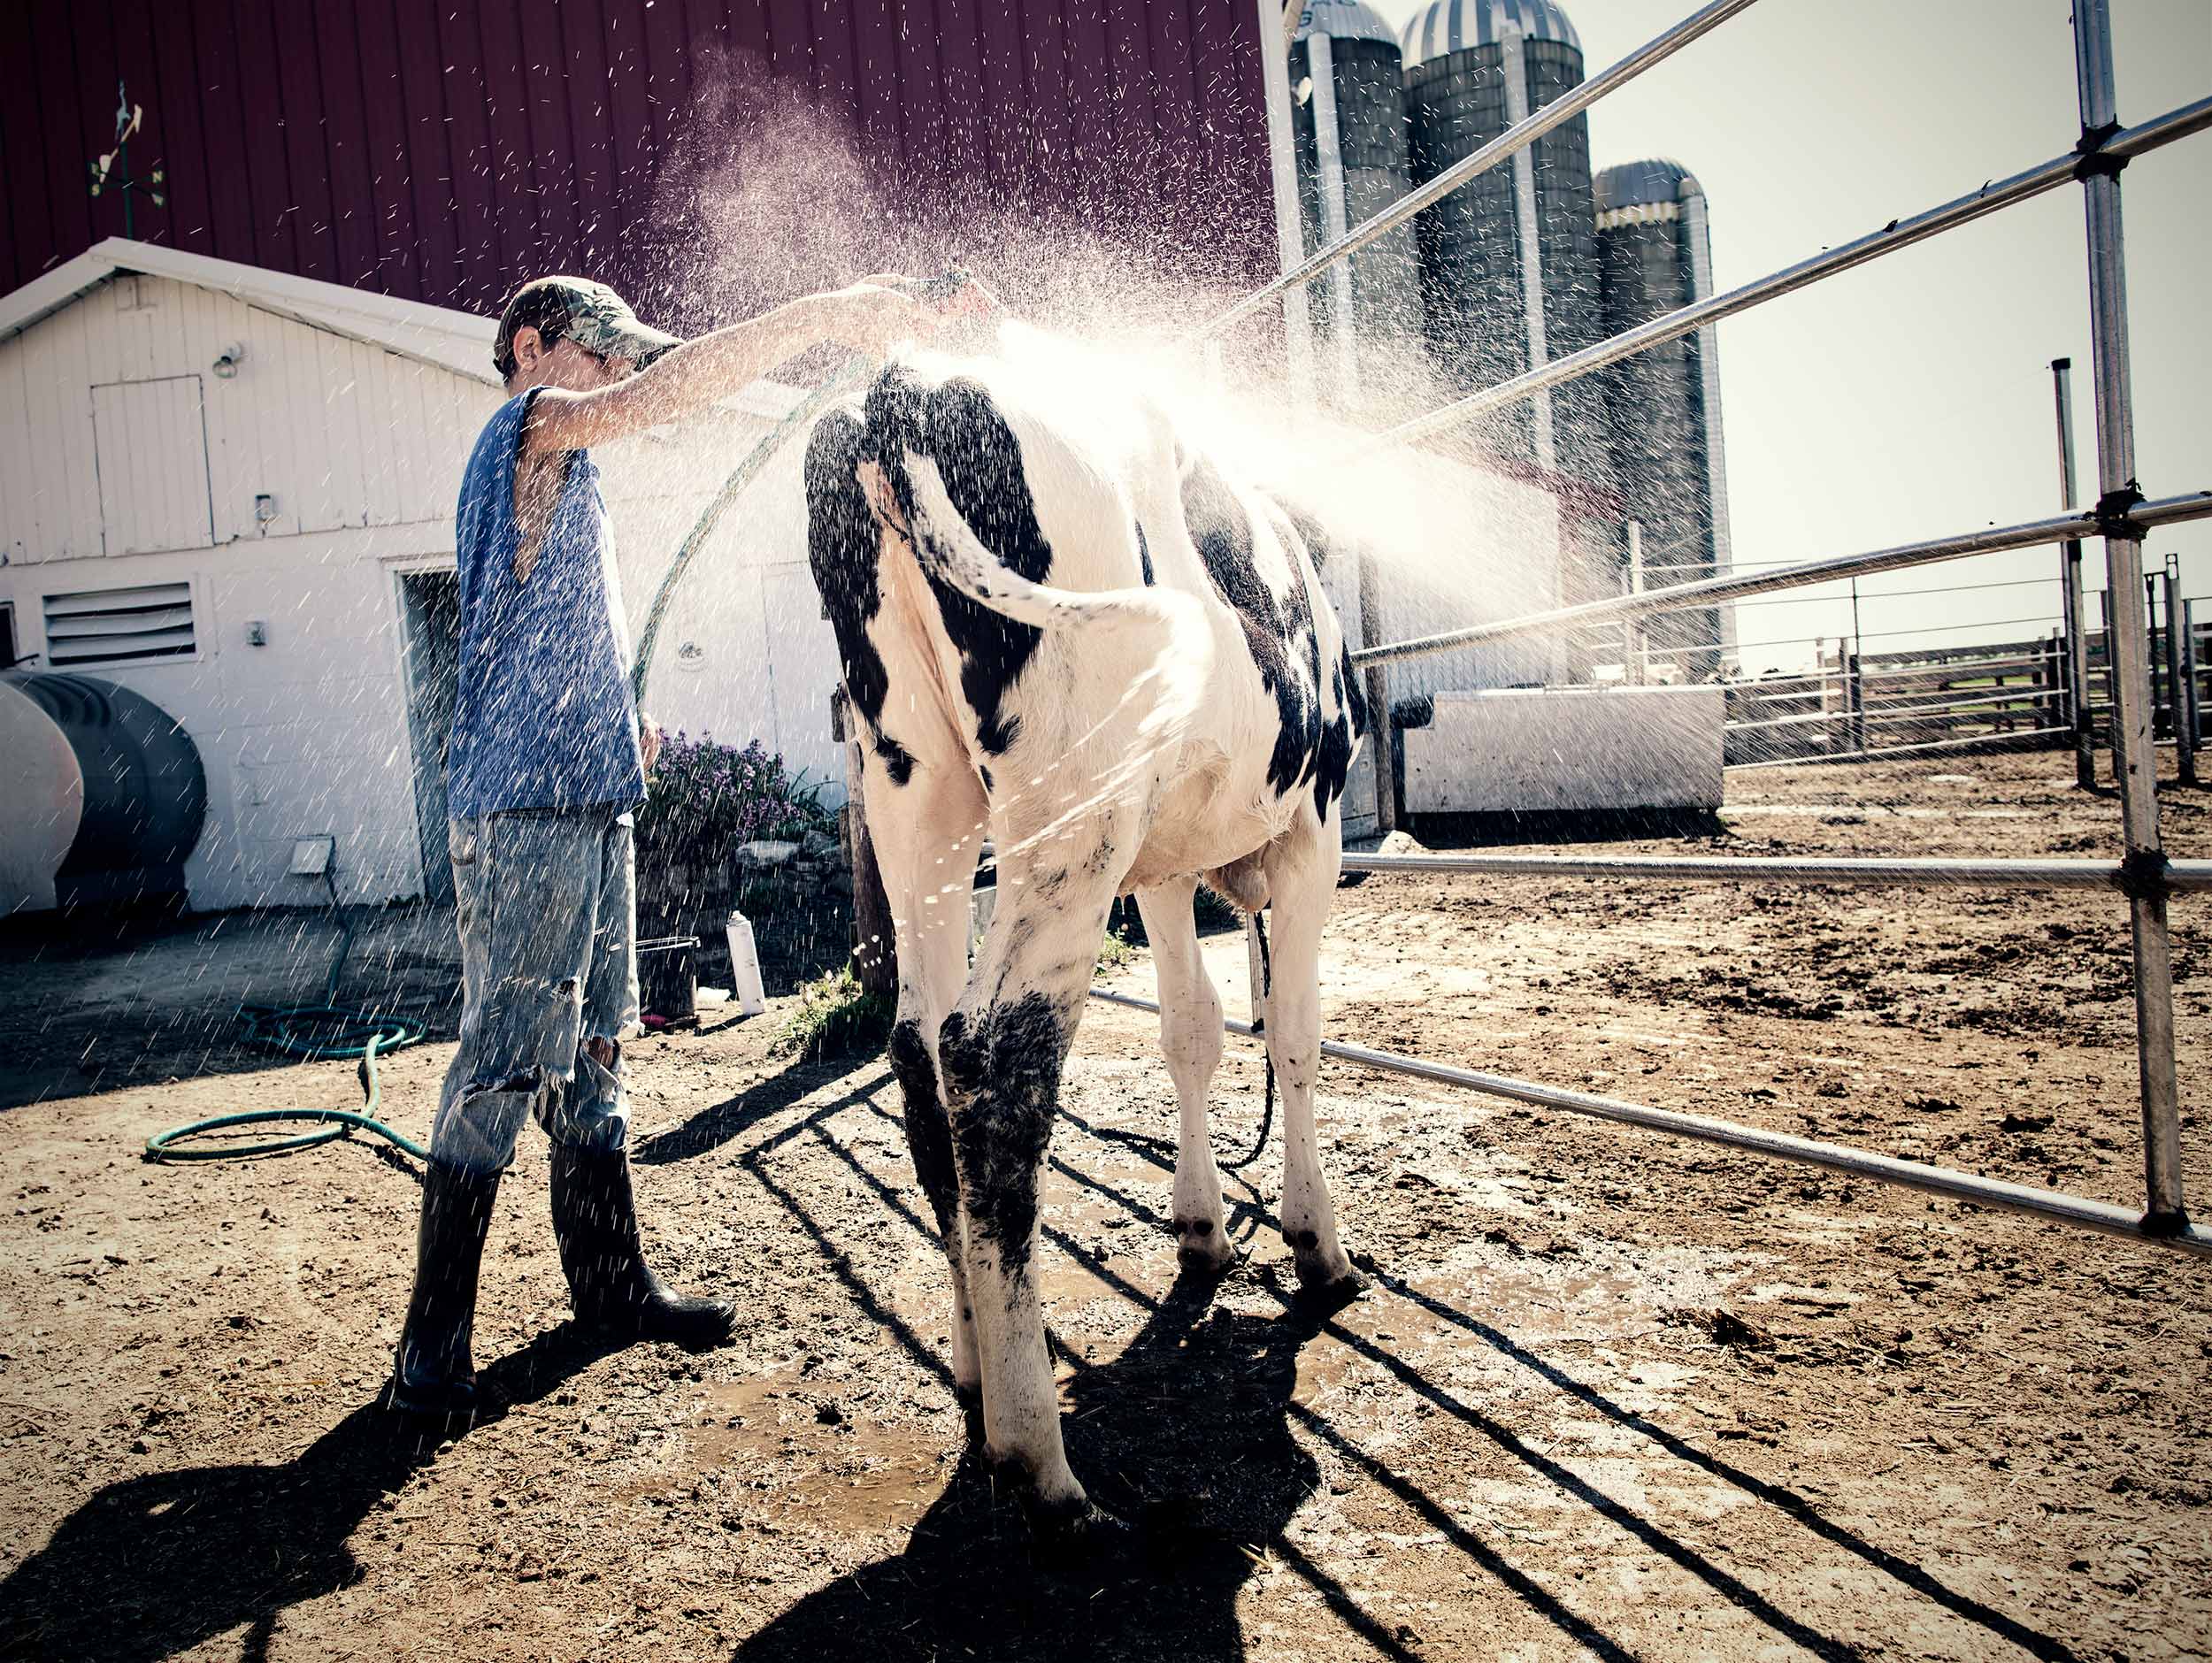 Boy spraying off cow with hose for stock show agriculture photography